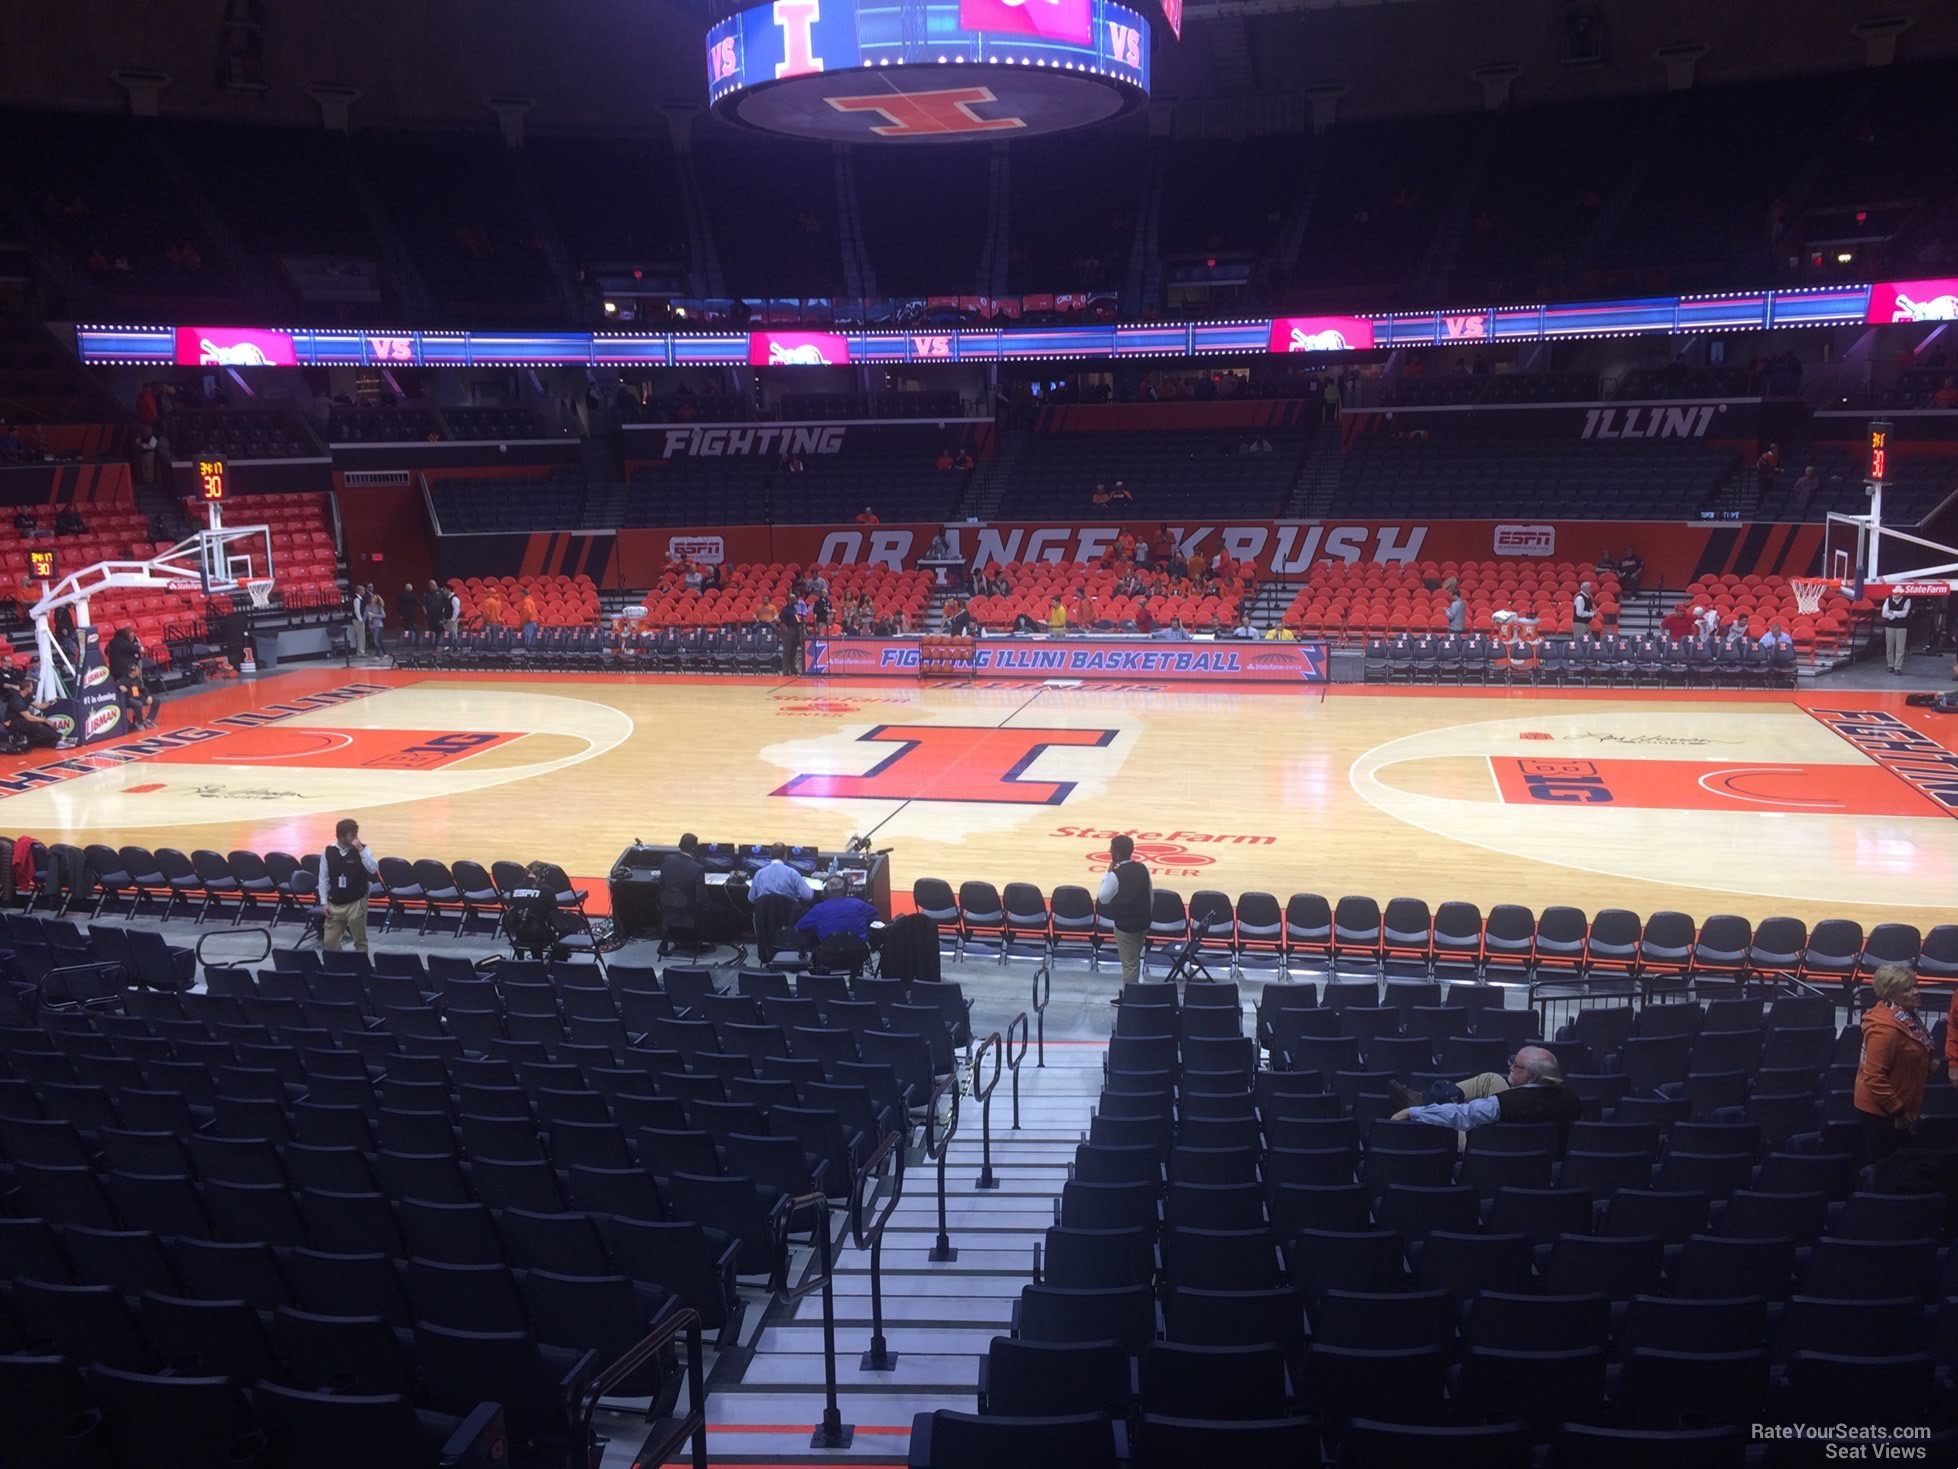 section 120, row 16 seat view  - state farm center